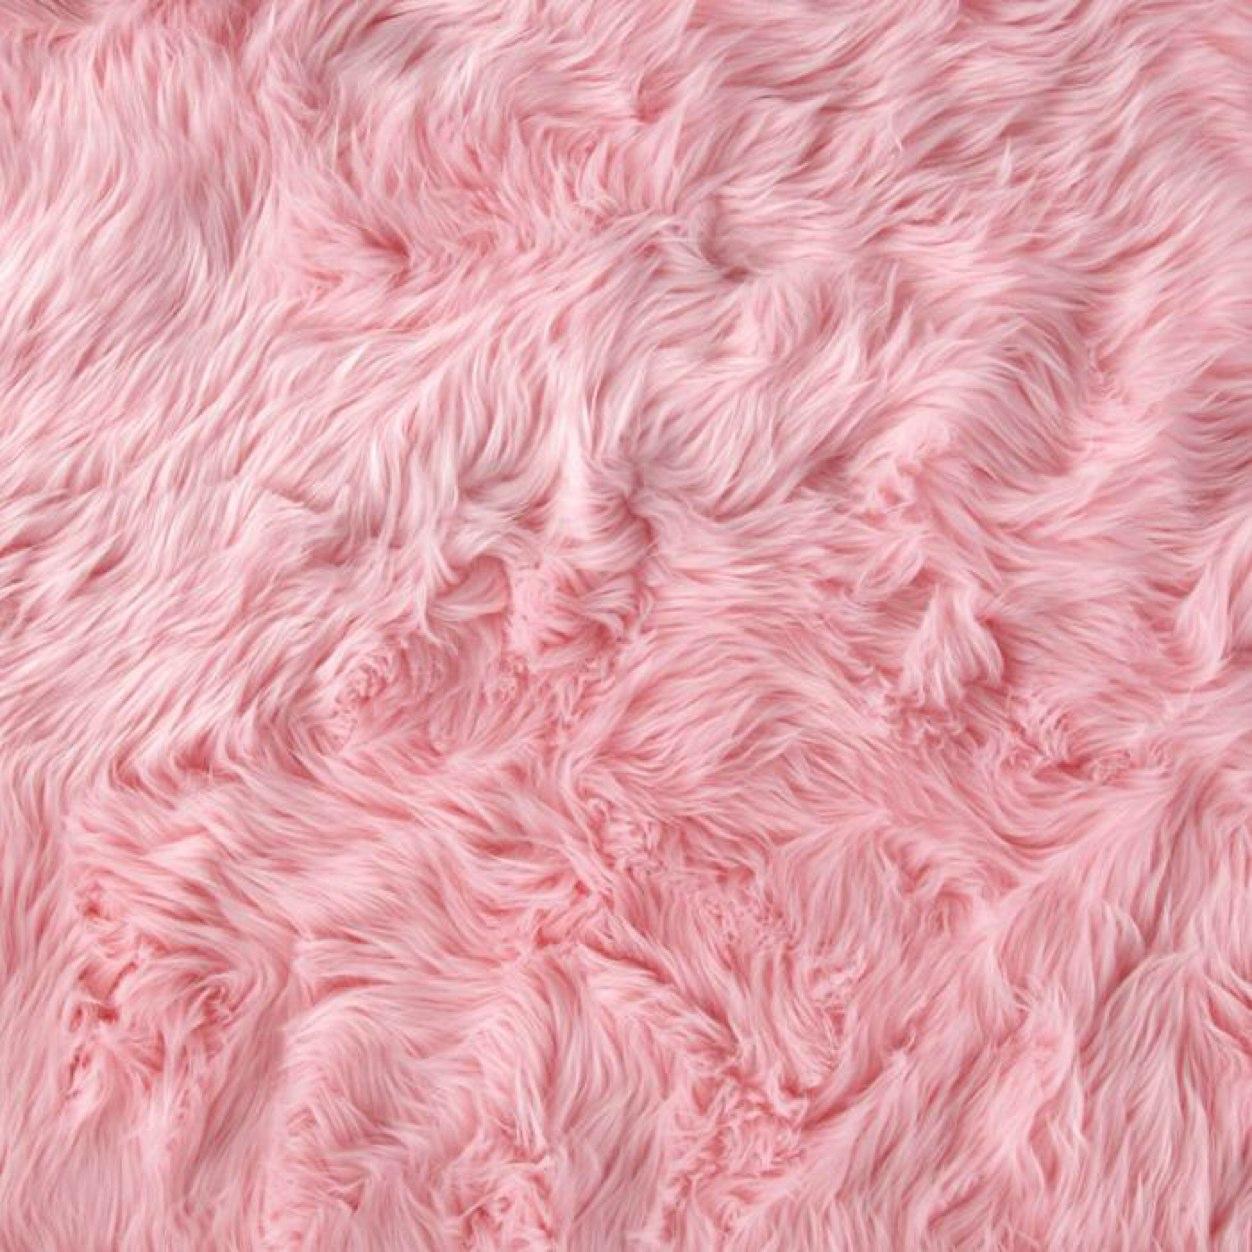 Pink, Fur, And Wallpaper Image - Pink Furry Background - HD Wallpaper 